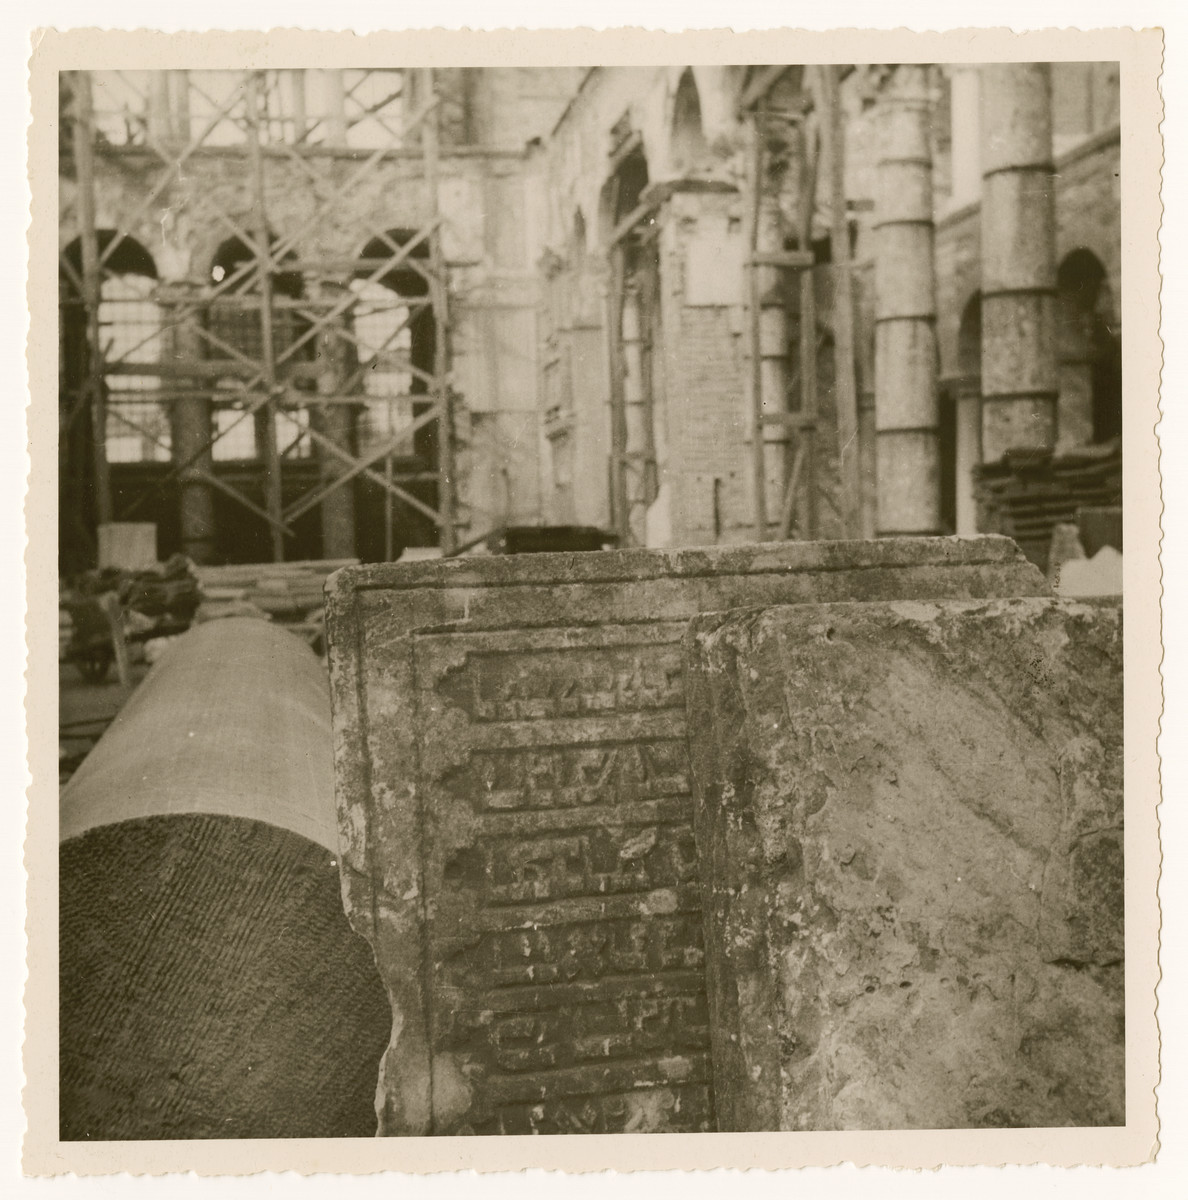 Postwar view of a church in Salonika constructed in part from Jewish tombstones.

The original caption reads "Tombstones taken by Greeks for part of church."